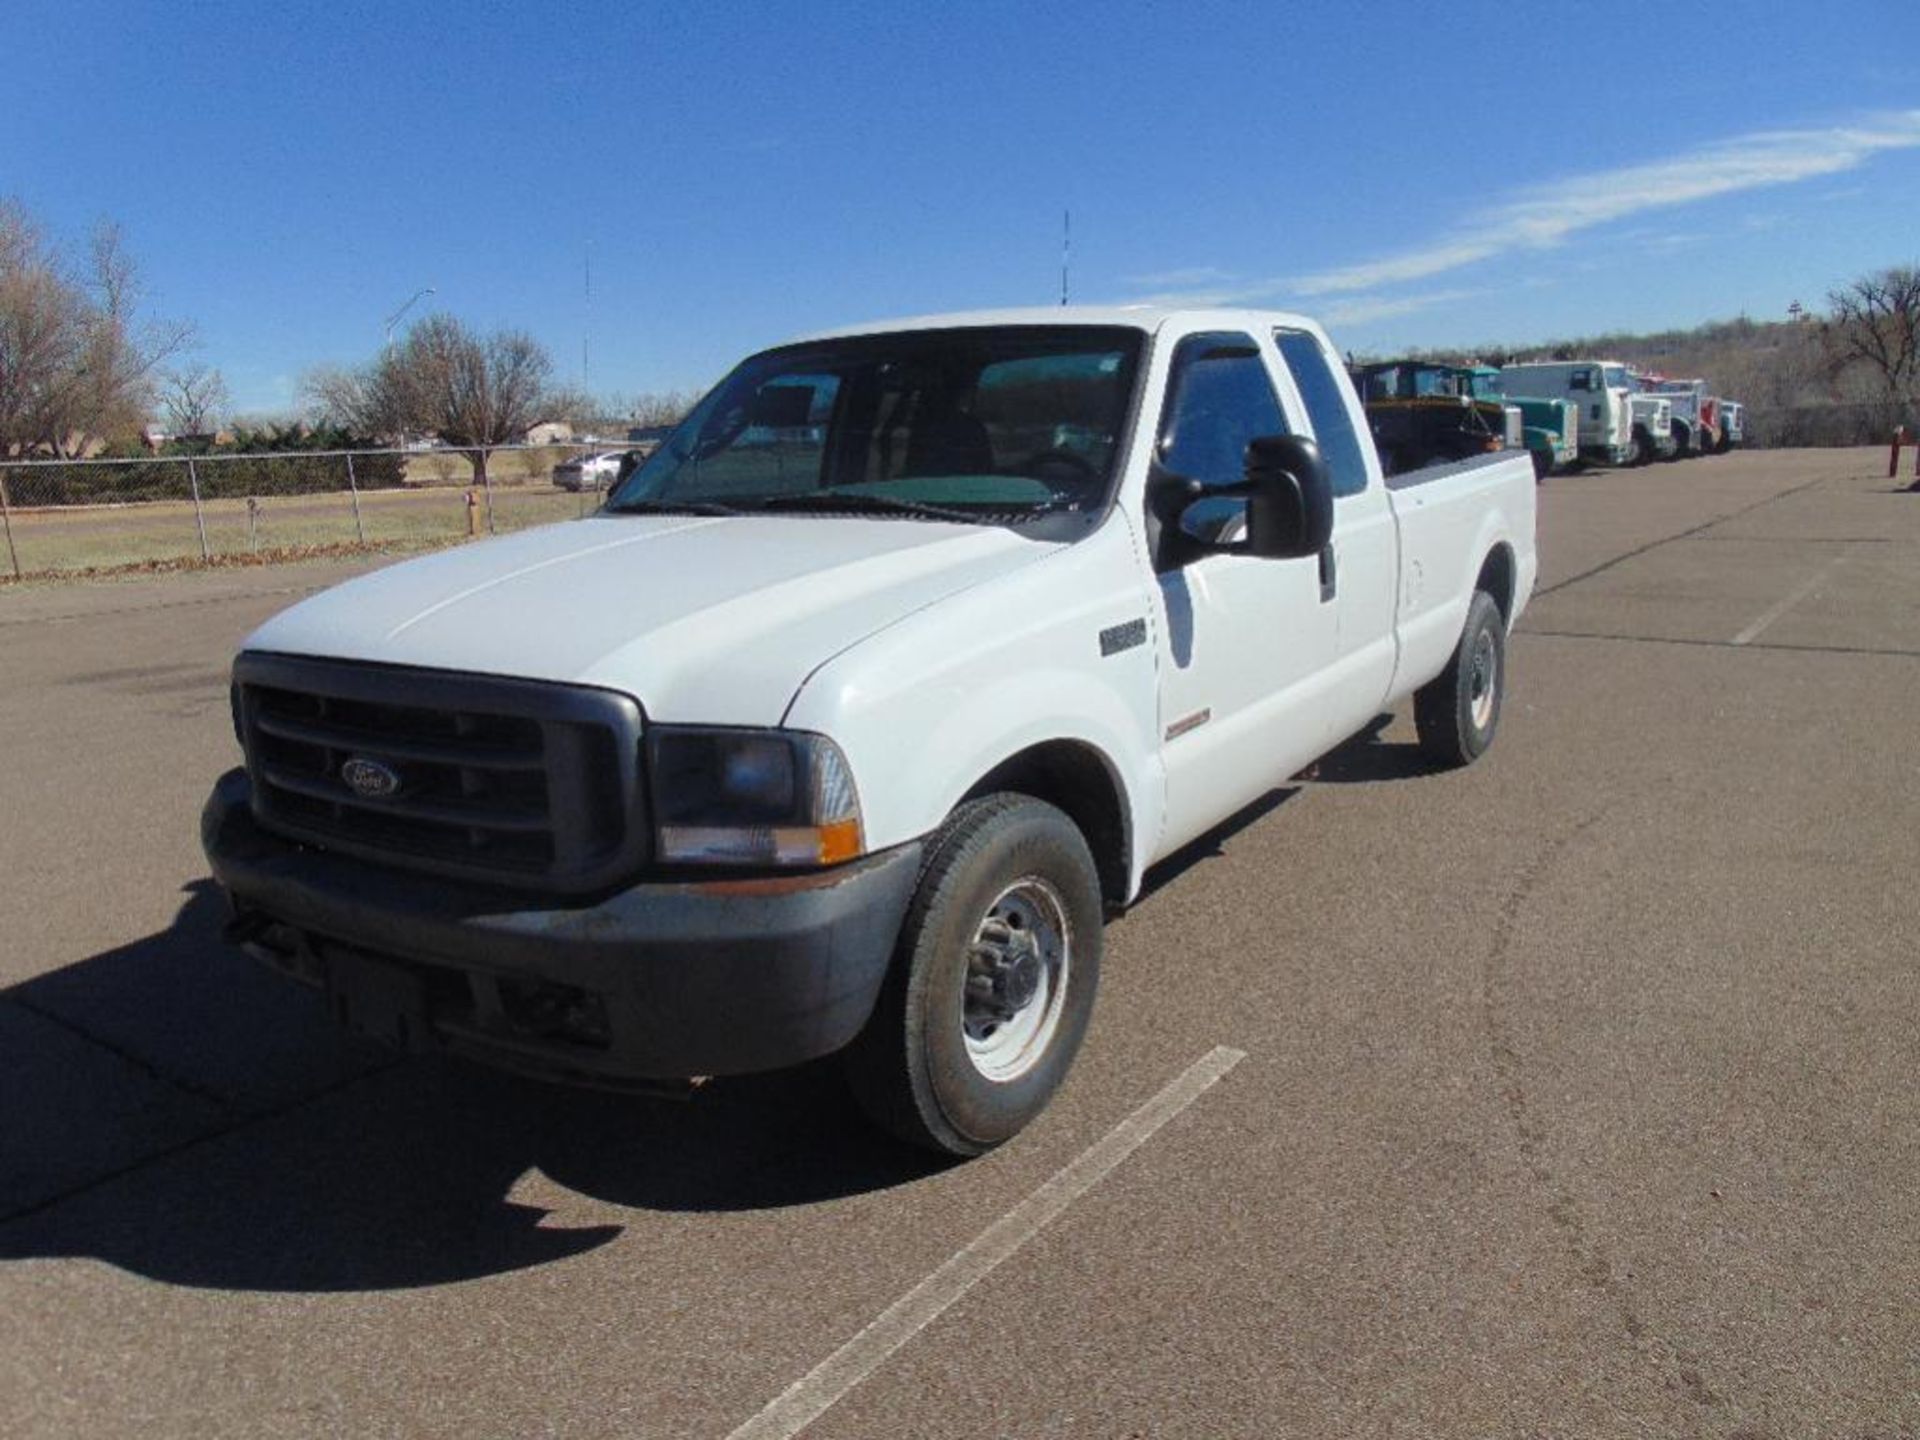 2004 Ford F250 Extcab Pickup s/n 1ftnx20px4eb72510,pwr stroke eng,auto, od reads 160682 miles